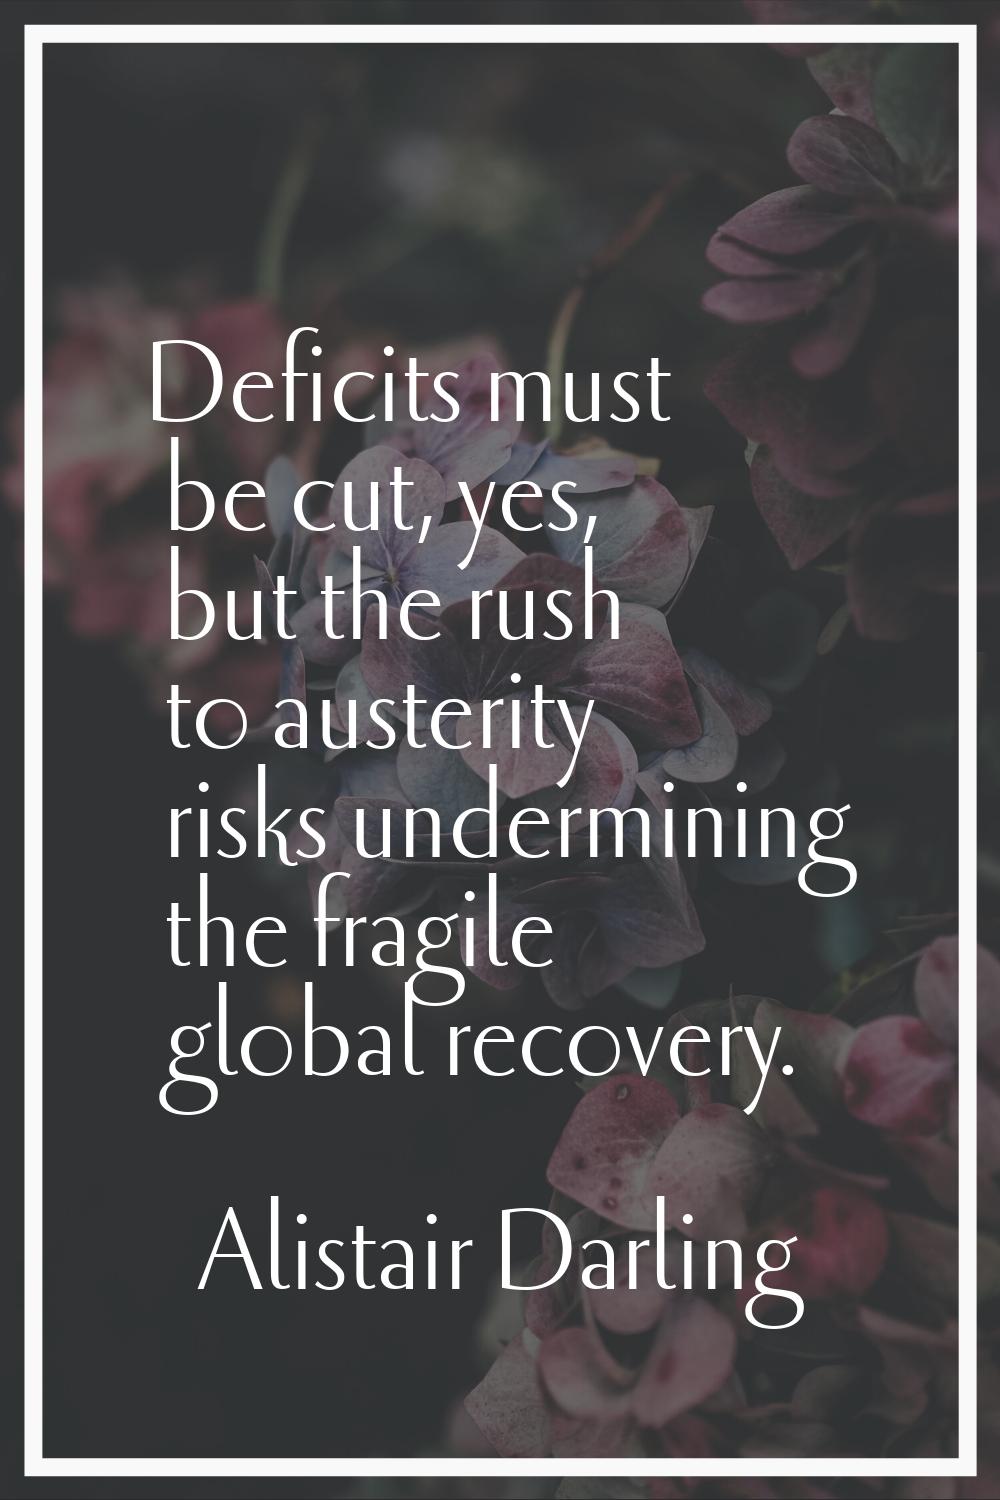 Deficits must be cut, yes, but the rush to austerity risks undermining the fragile global recovery.